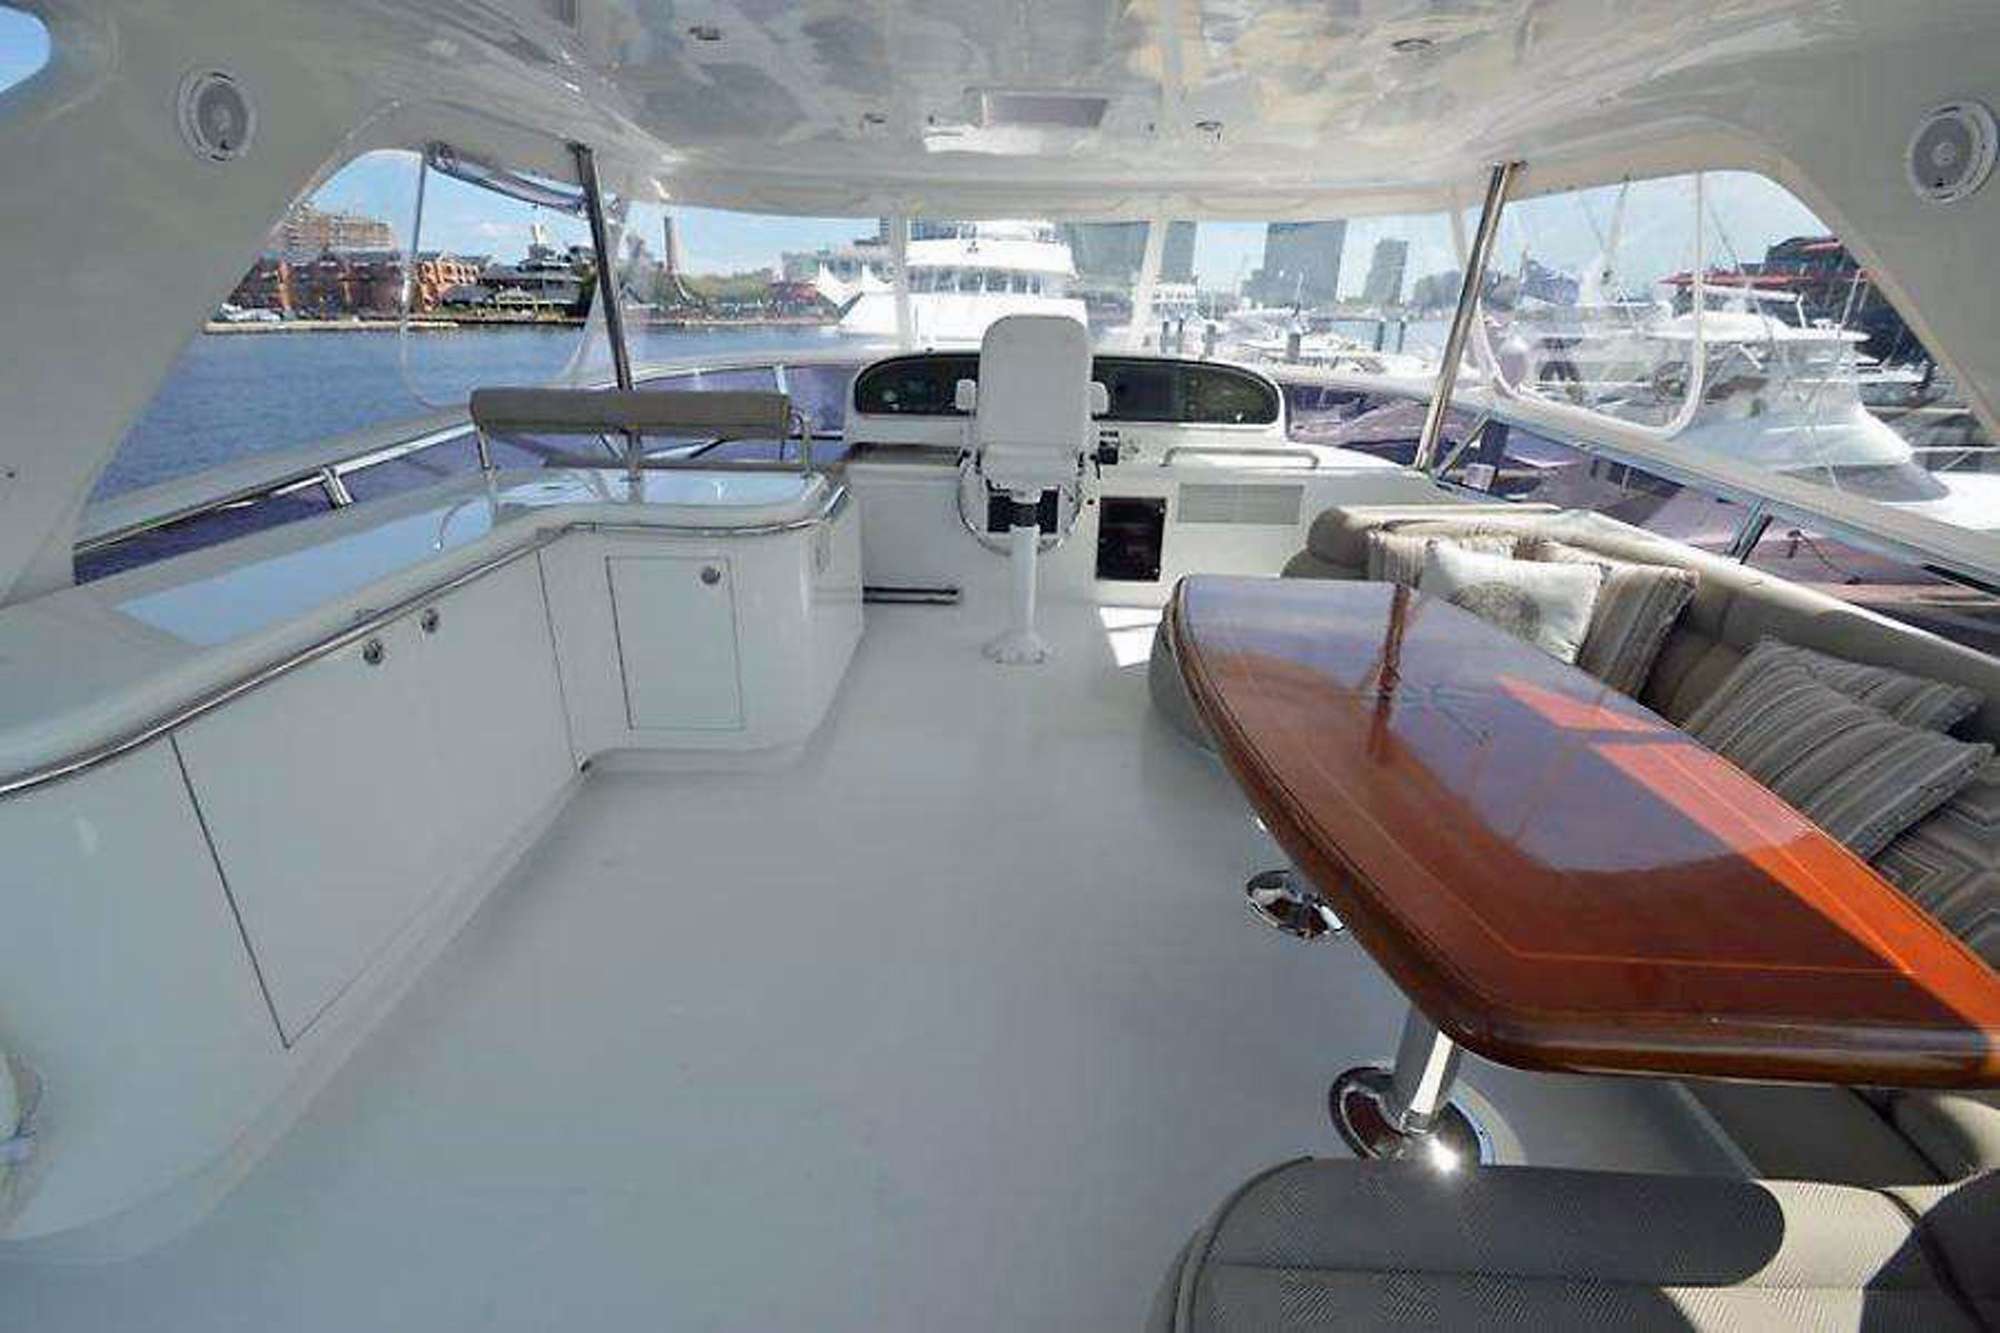 Upper Deck Seating and Helm